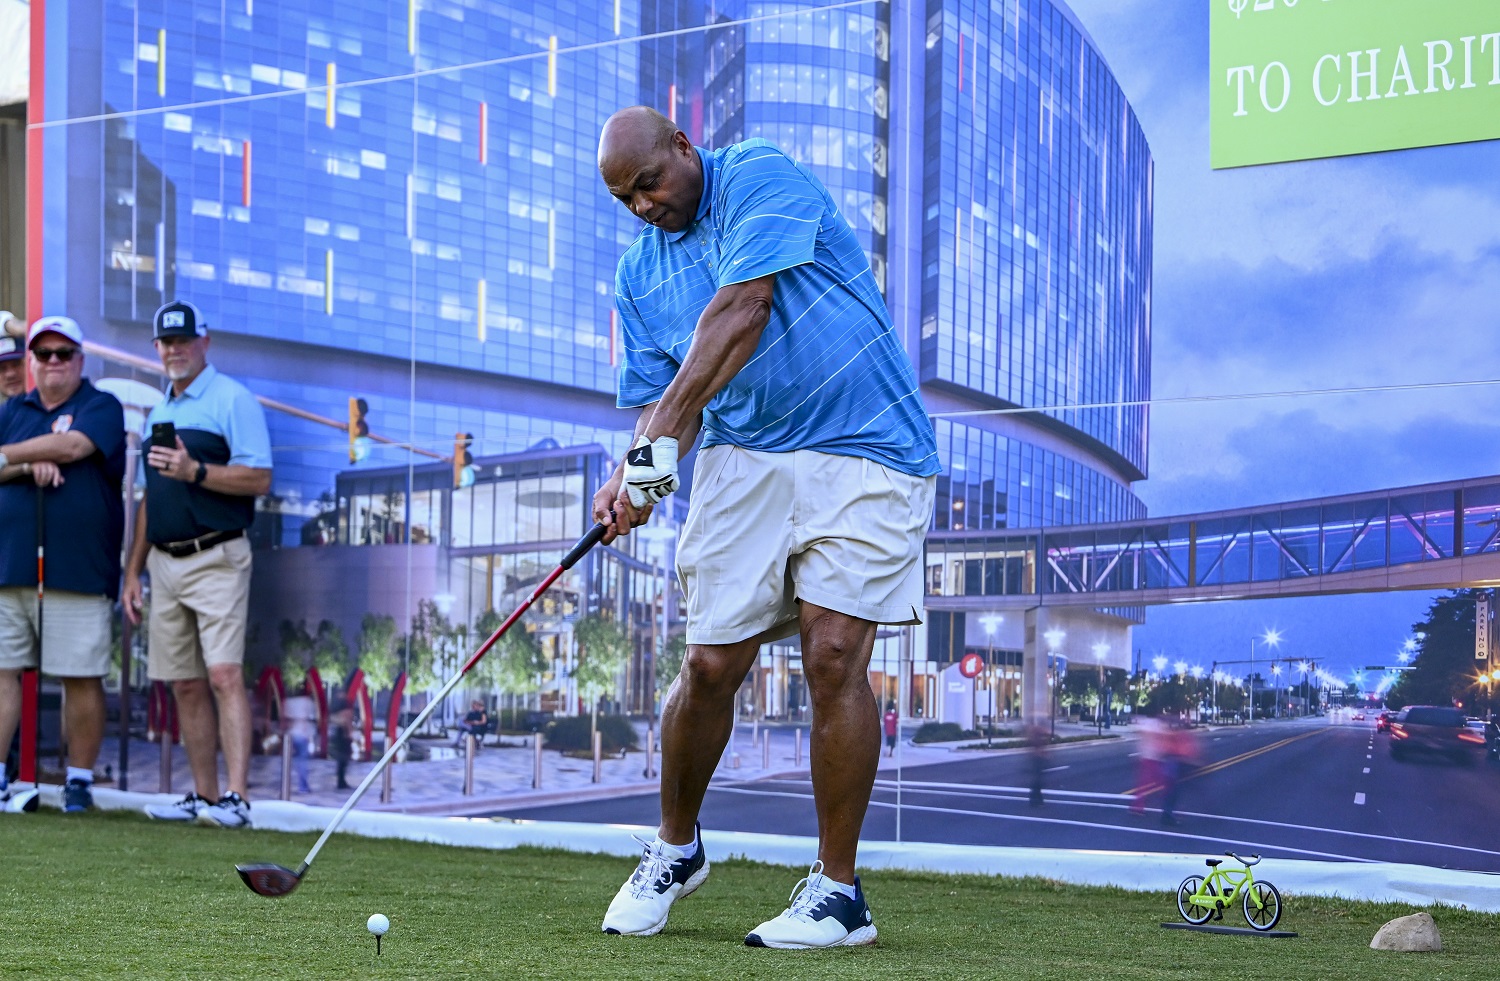 Charles Barkley hits his tee shot at the NCR Pro-Am prior to the PGA Tour Champions Regions Tradition at Greystone Golf and Country Club on May 11, 2022 in Birmingham, Alabama.